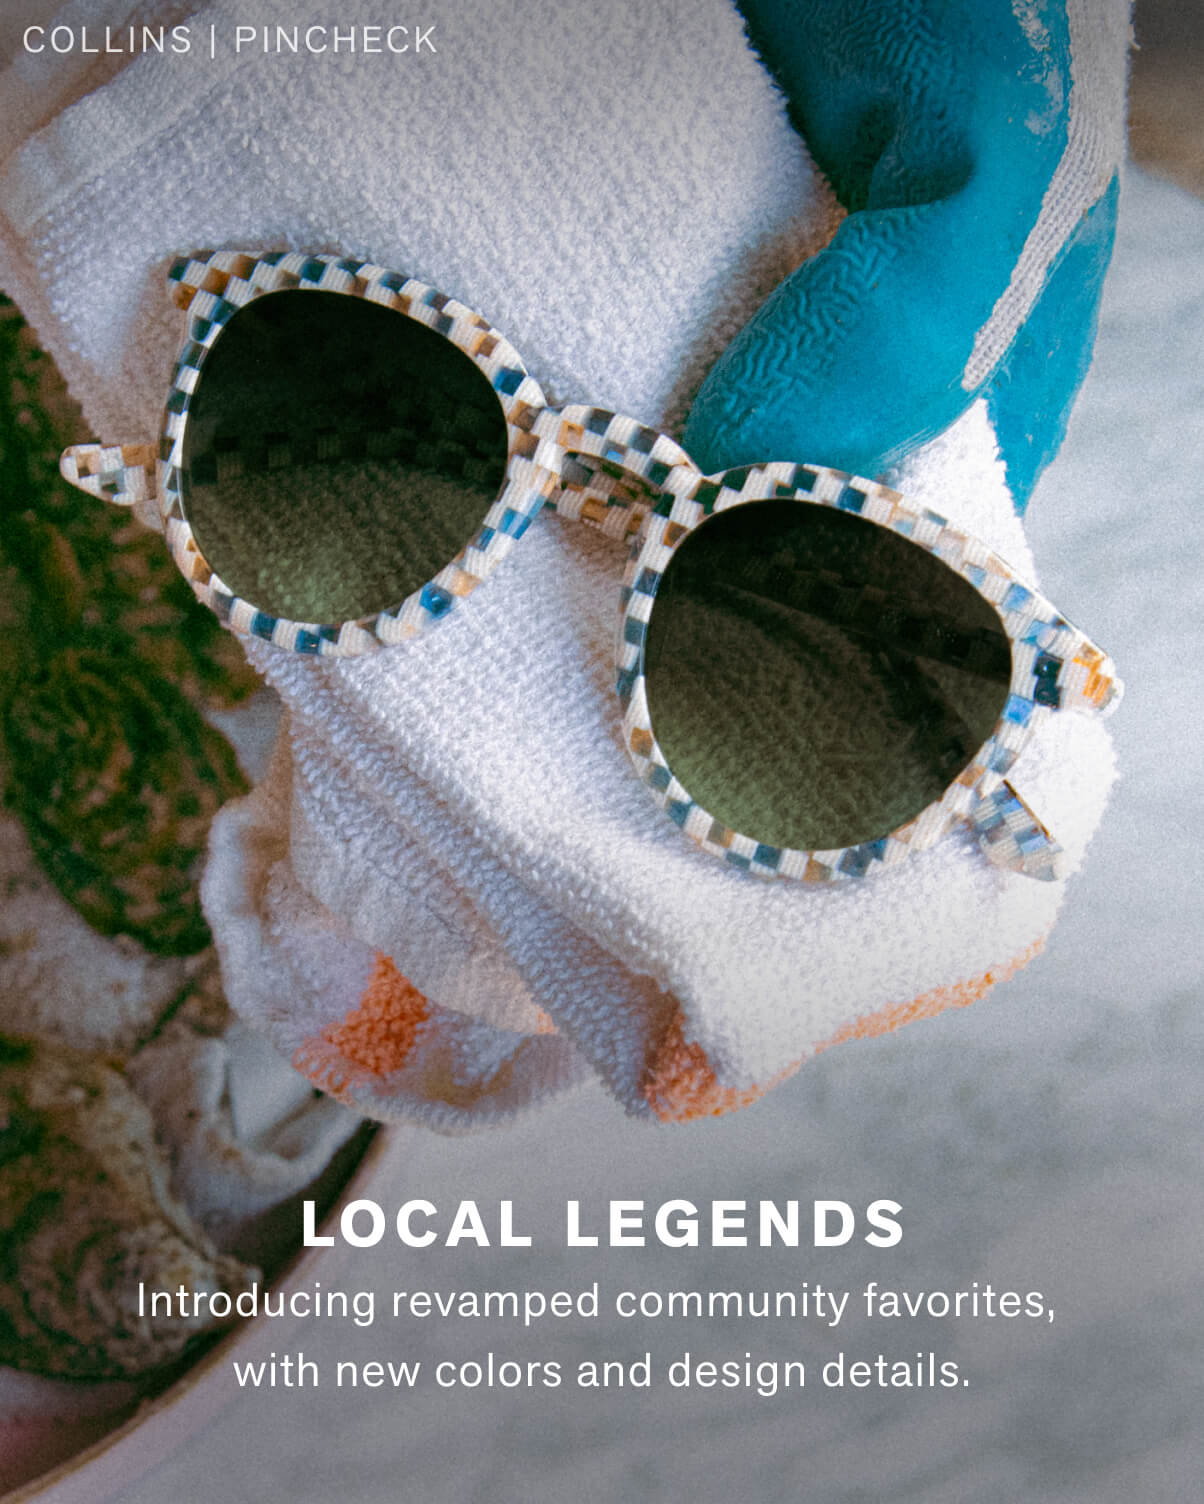 LOCAL LEGENDS  Introducing revamped community favorites, with new colors and design details.